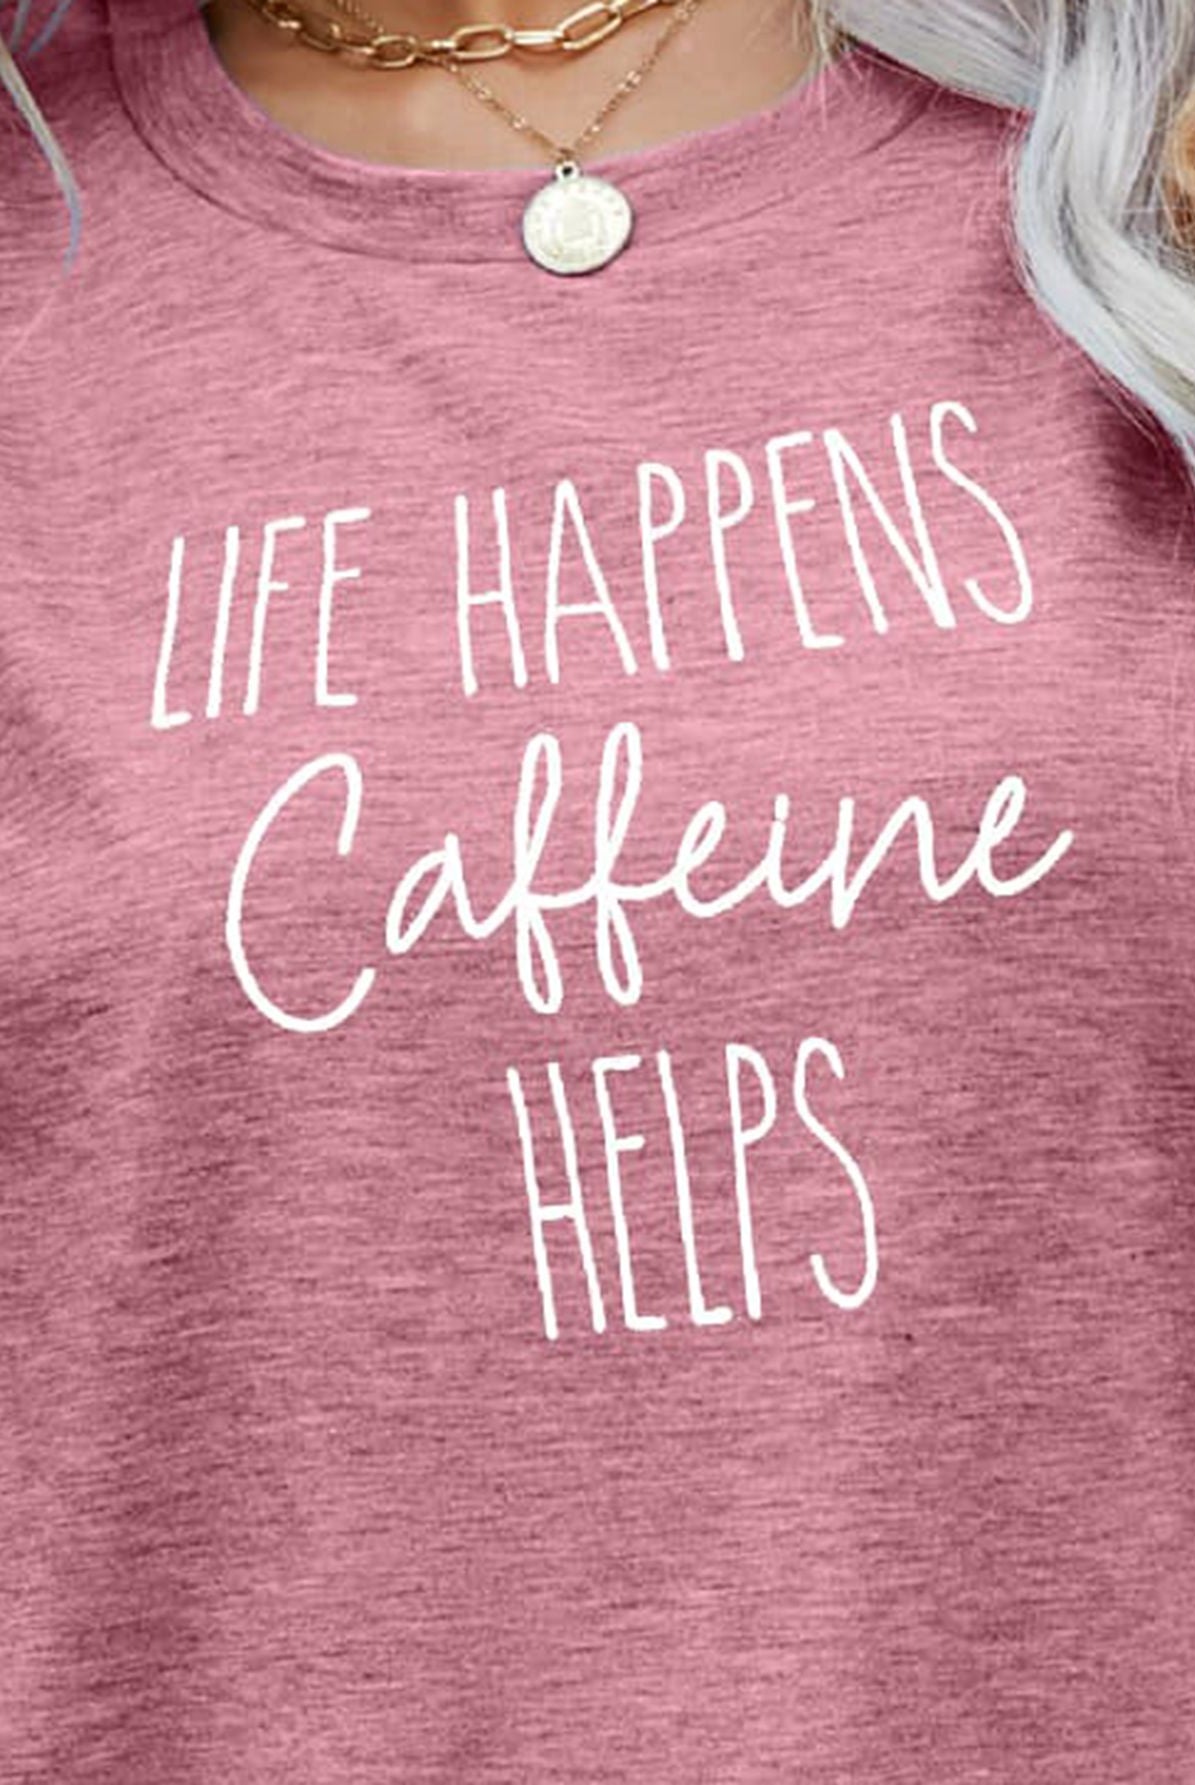 Rosy Brown LIFE HAPPENS CAFFEINE HELPS Graphic Tee Tops